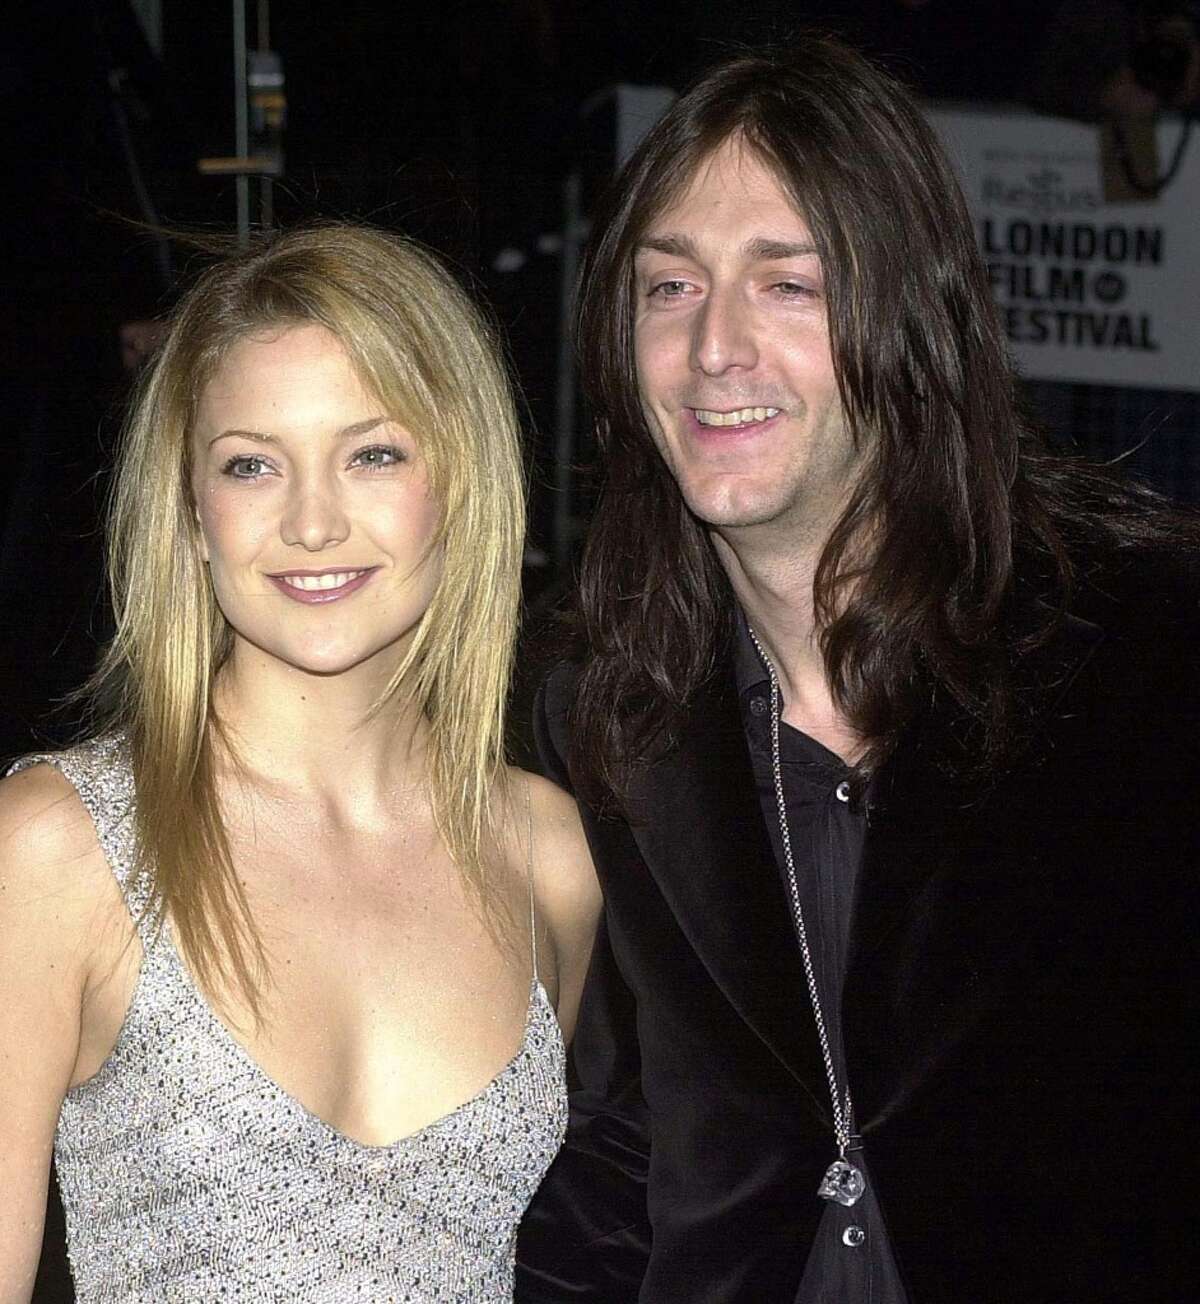 Actress Kate Hudson and musician Chris Robinson were married on New Year's Eve 2000 in Aspen, Colo. They divorced in 2007.